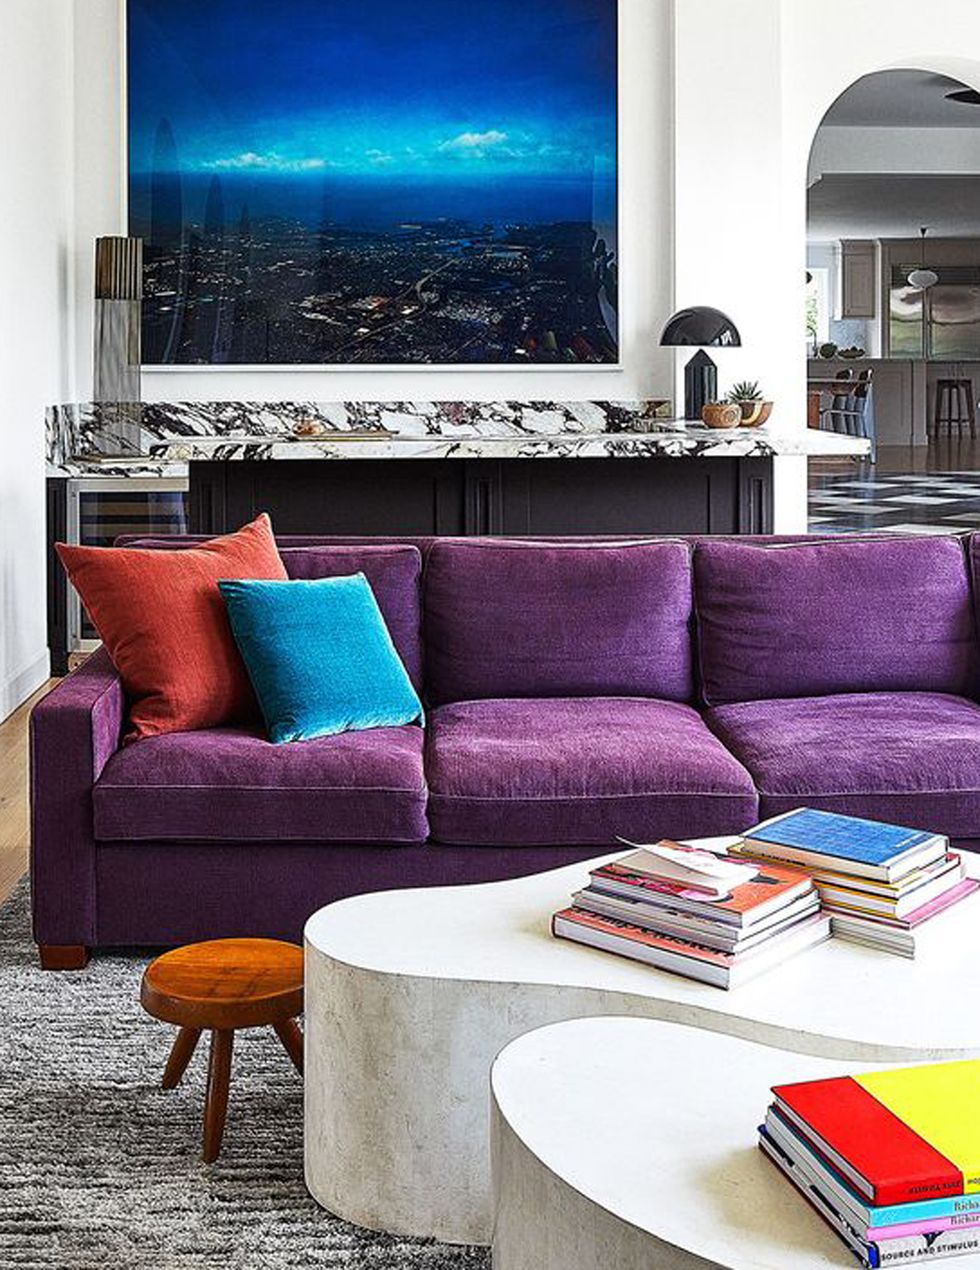 room with large tv on wall and purple sofa at center